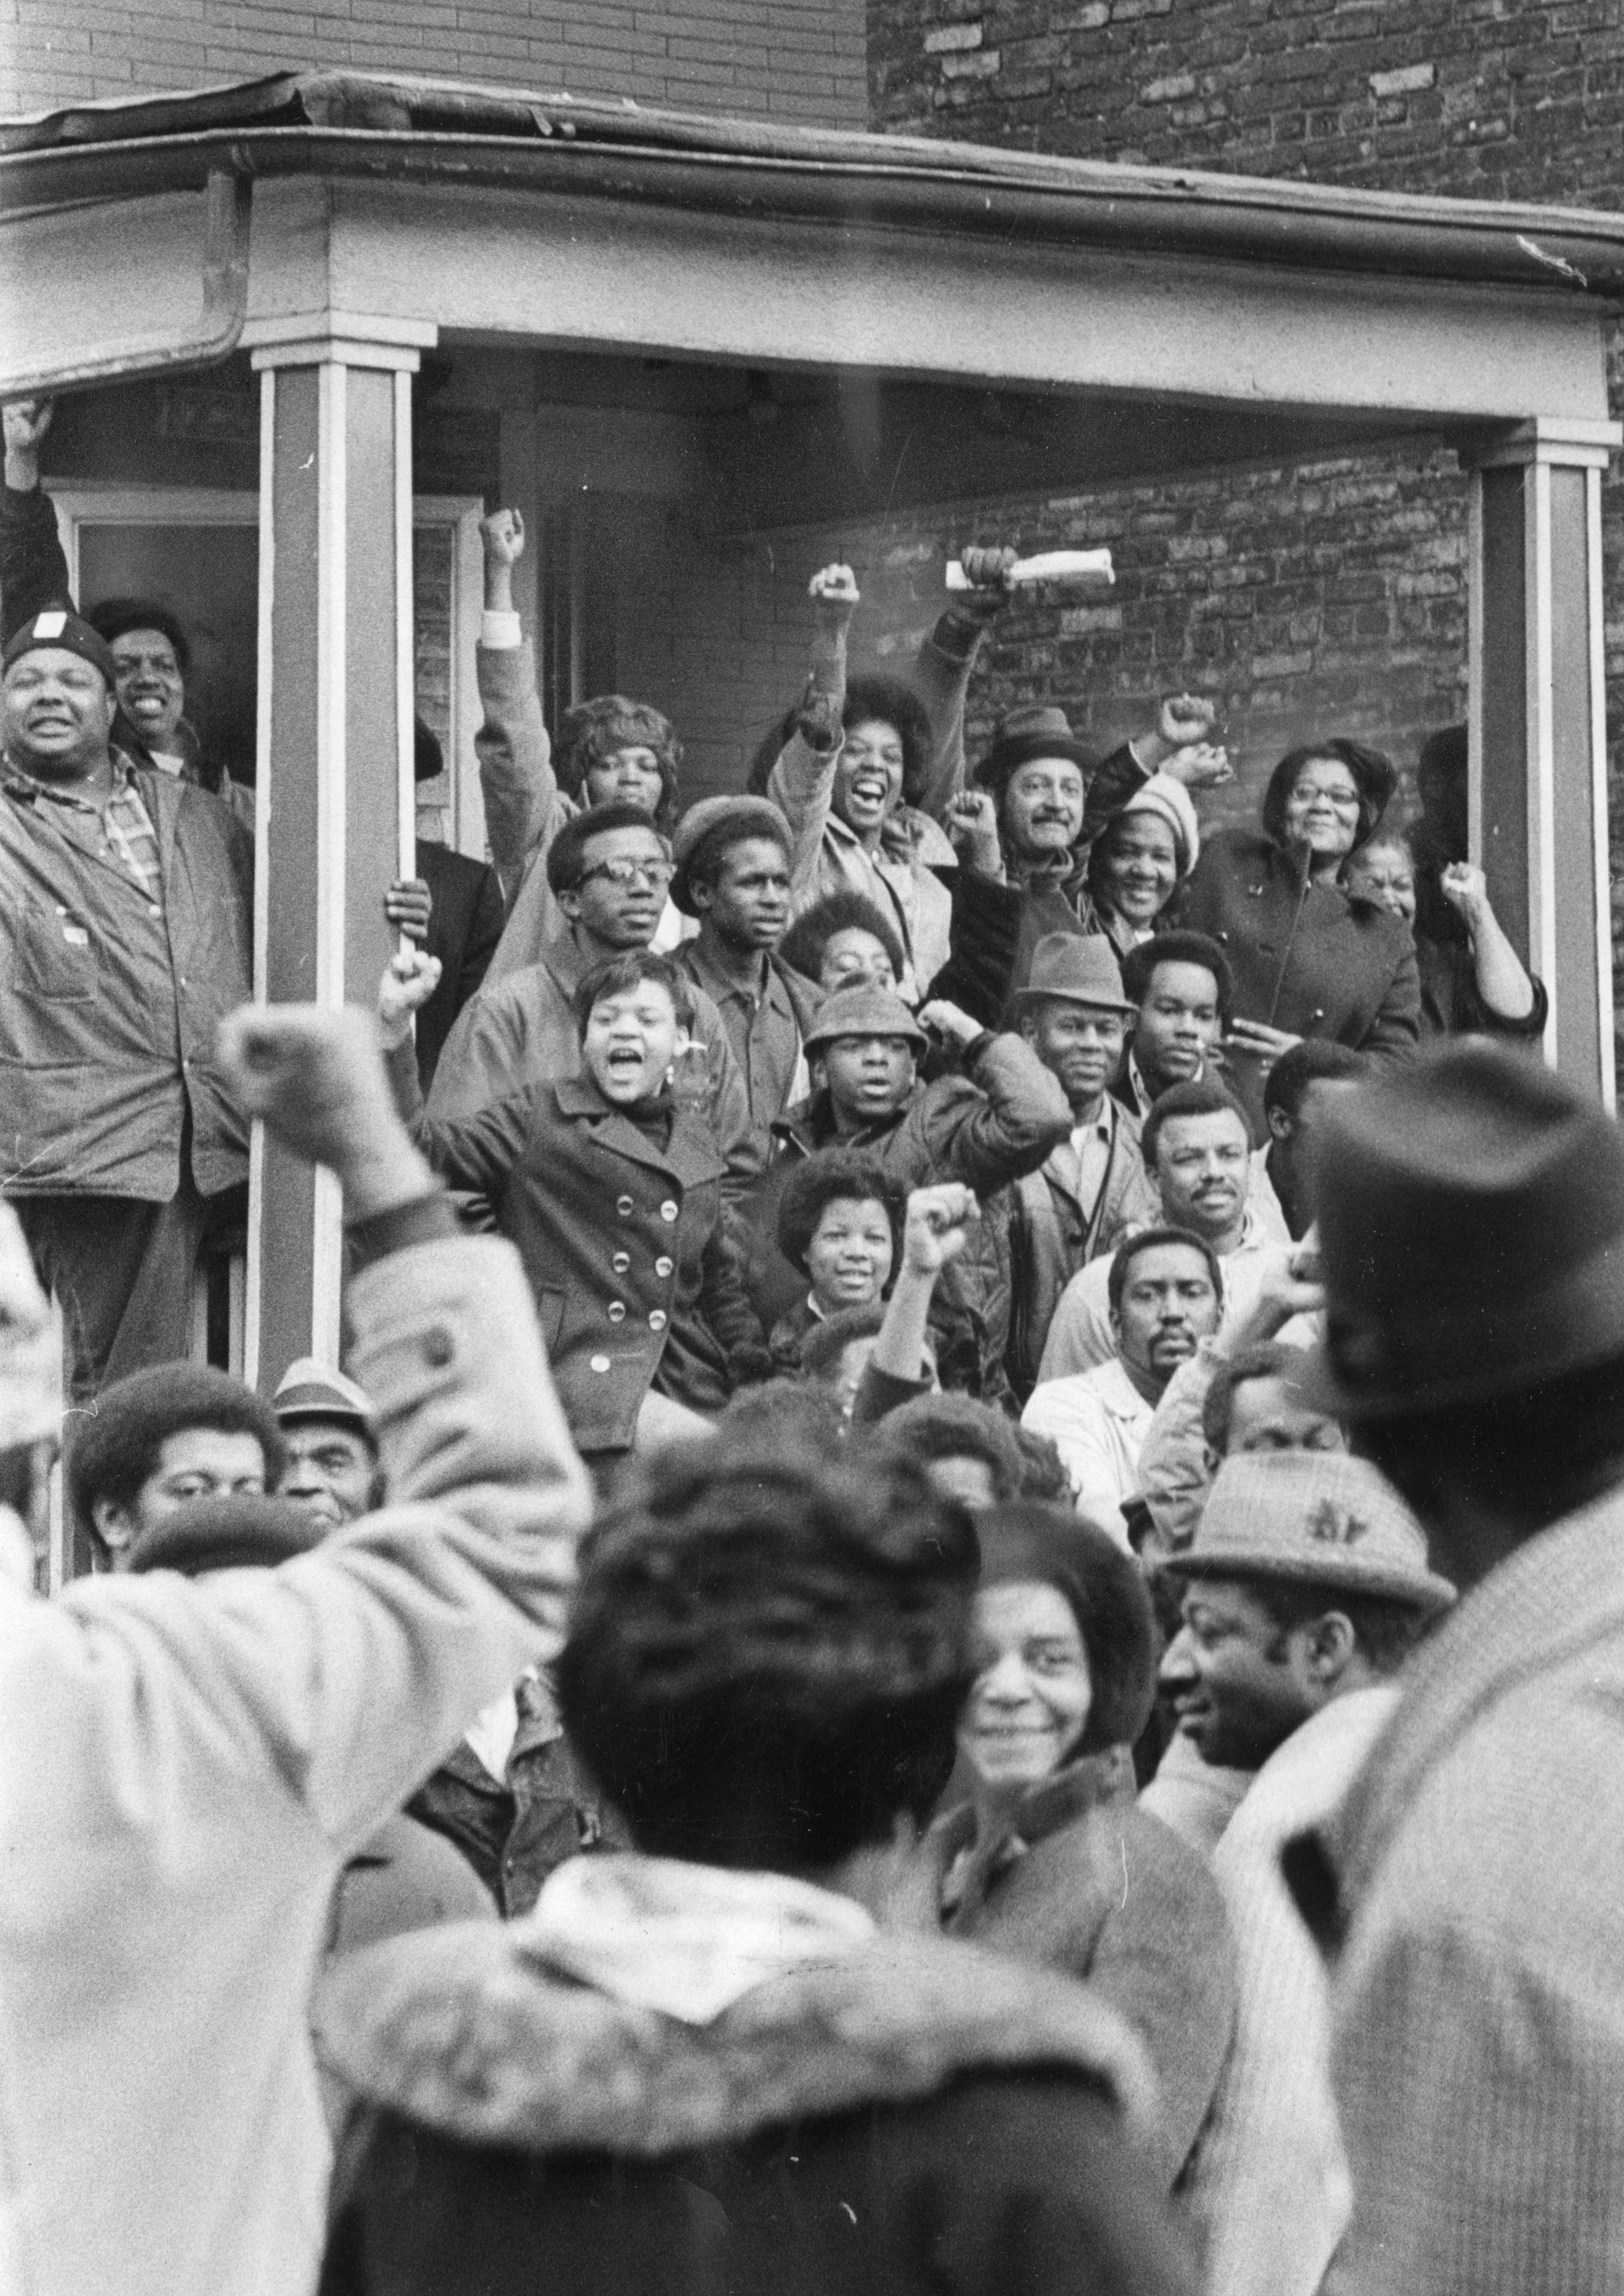 Protestors block the entrance at 1235 South Keeler in Chicago on March 23, 1970. They had gathered to prevent the sheriff's office from being able to evict residents.